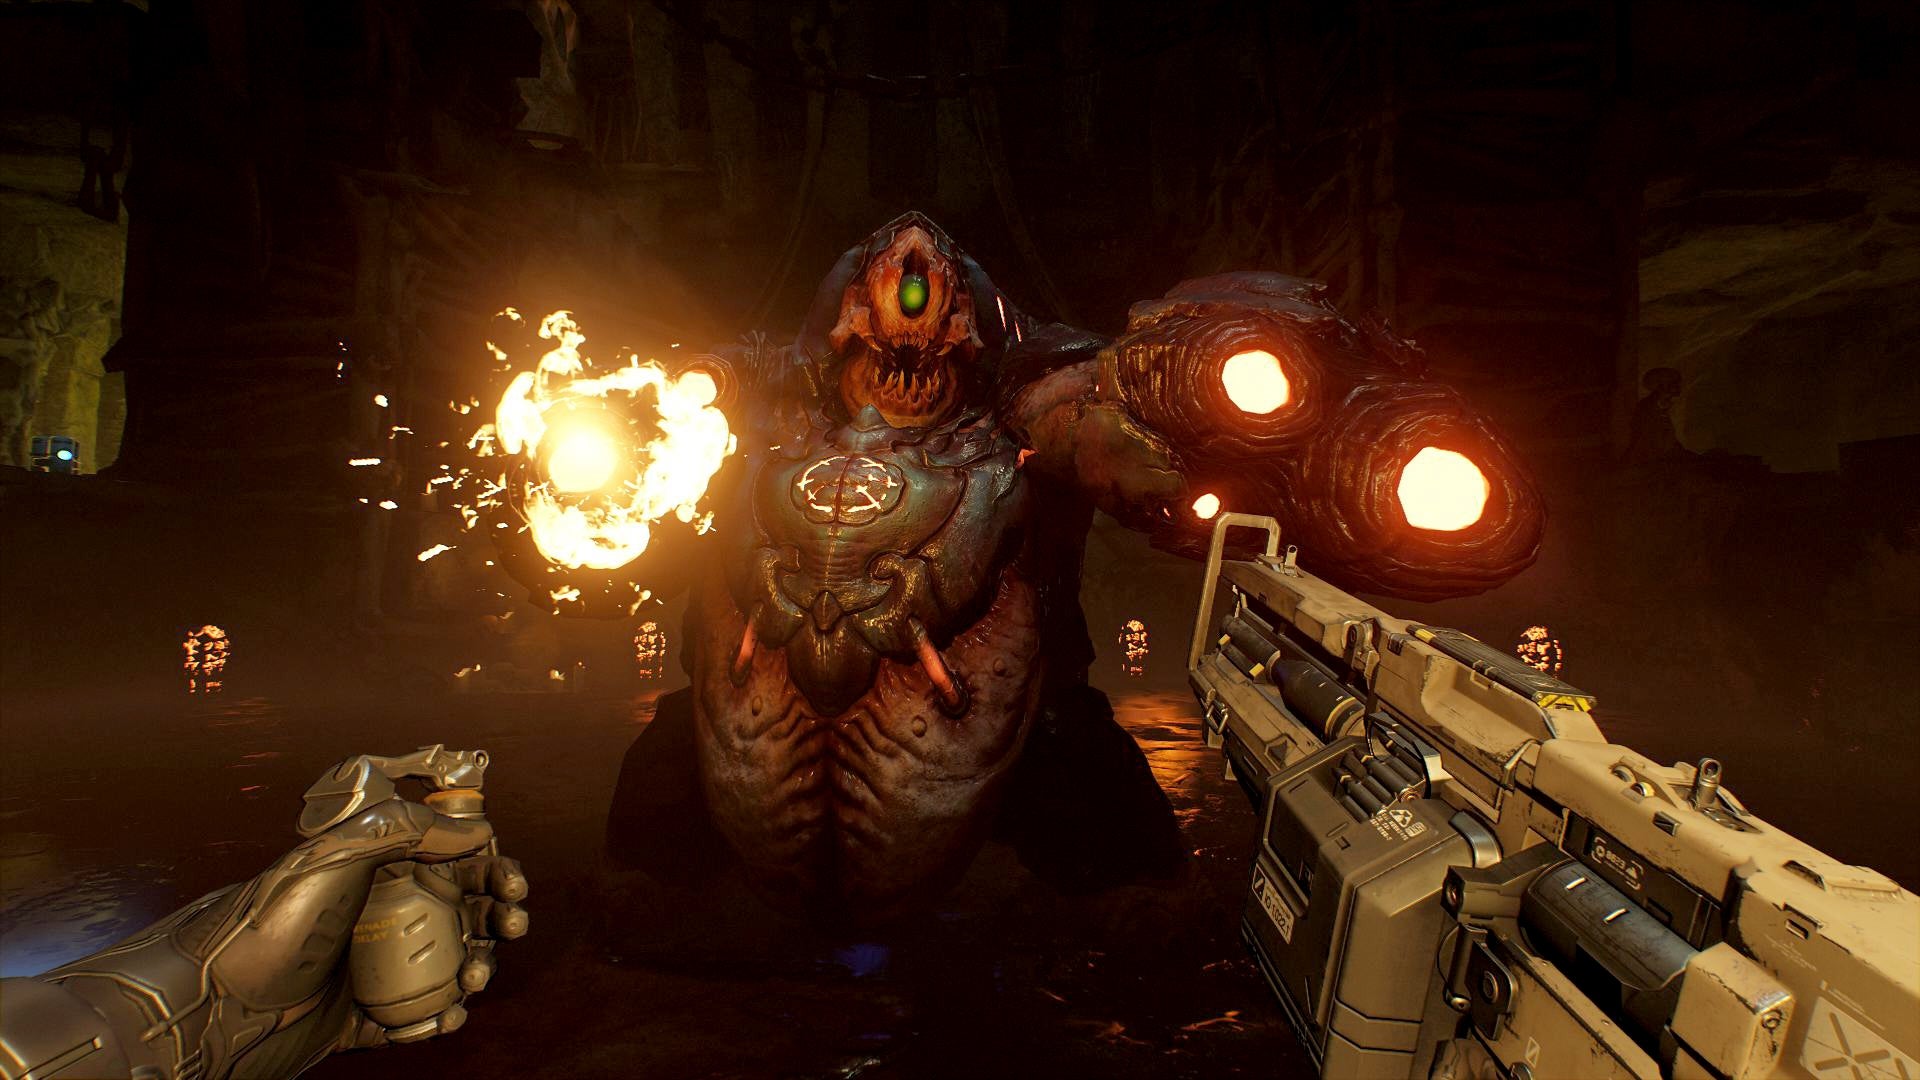 First-person view from Doom VFR game fighting a demon.